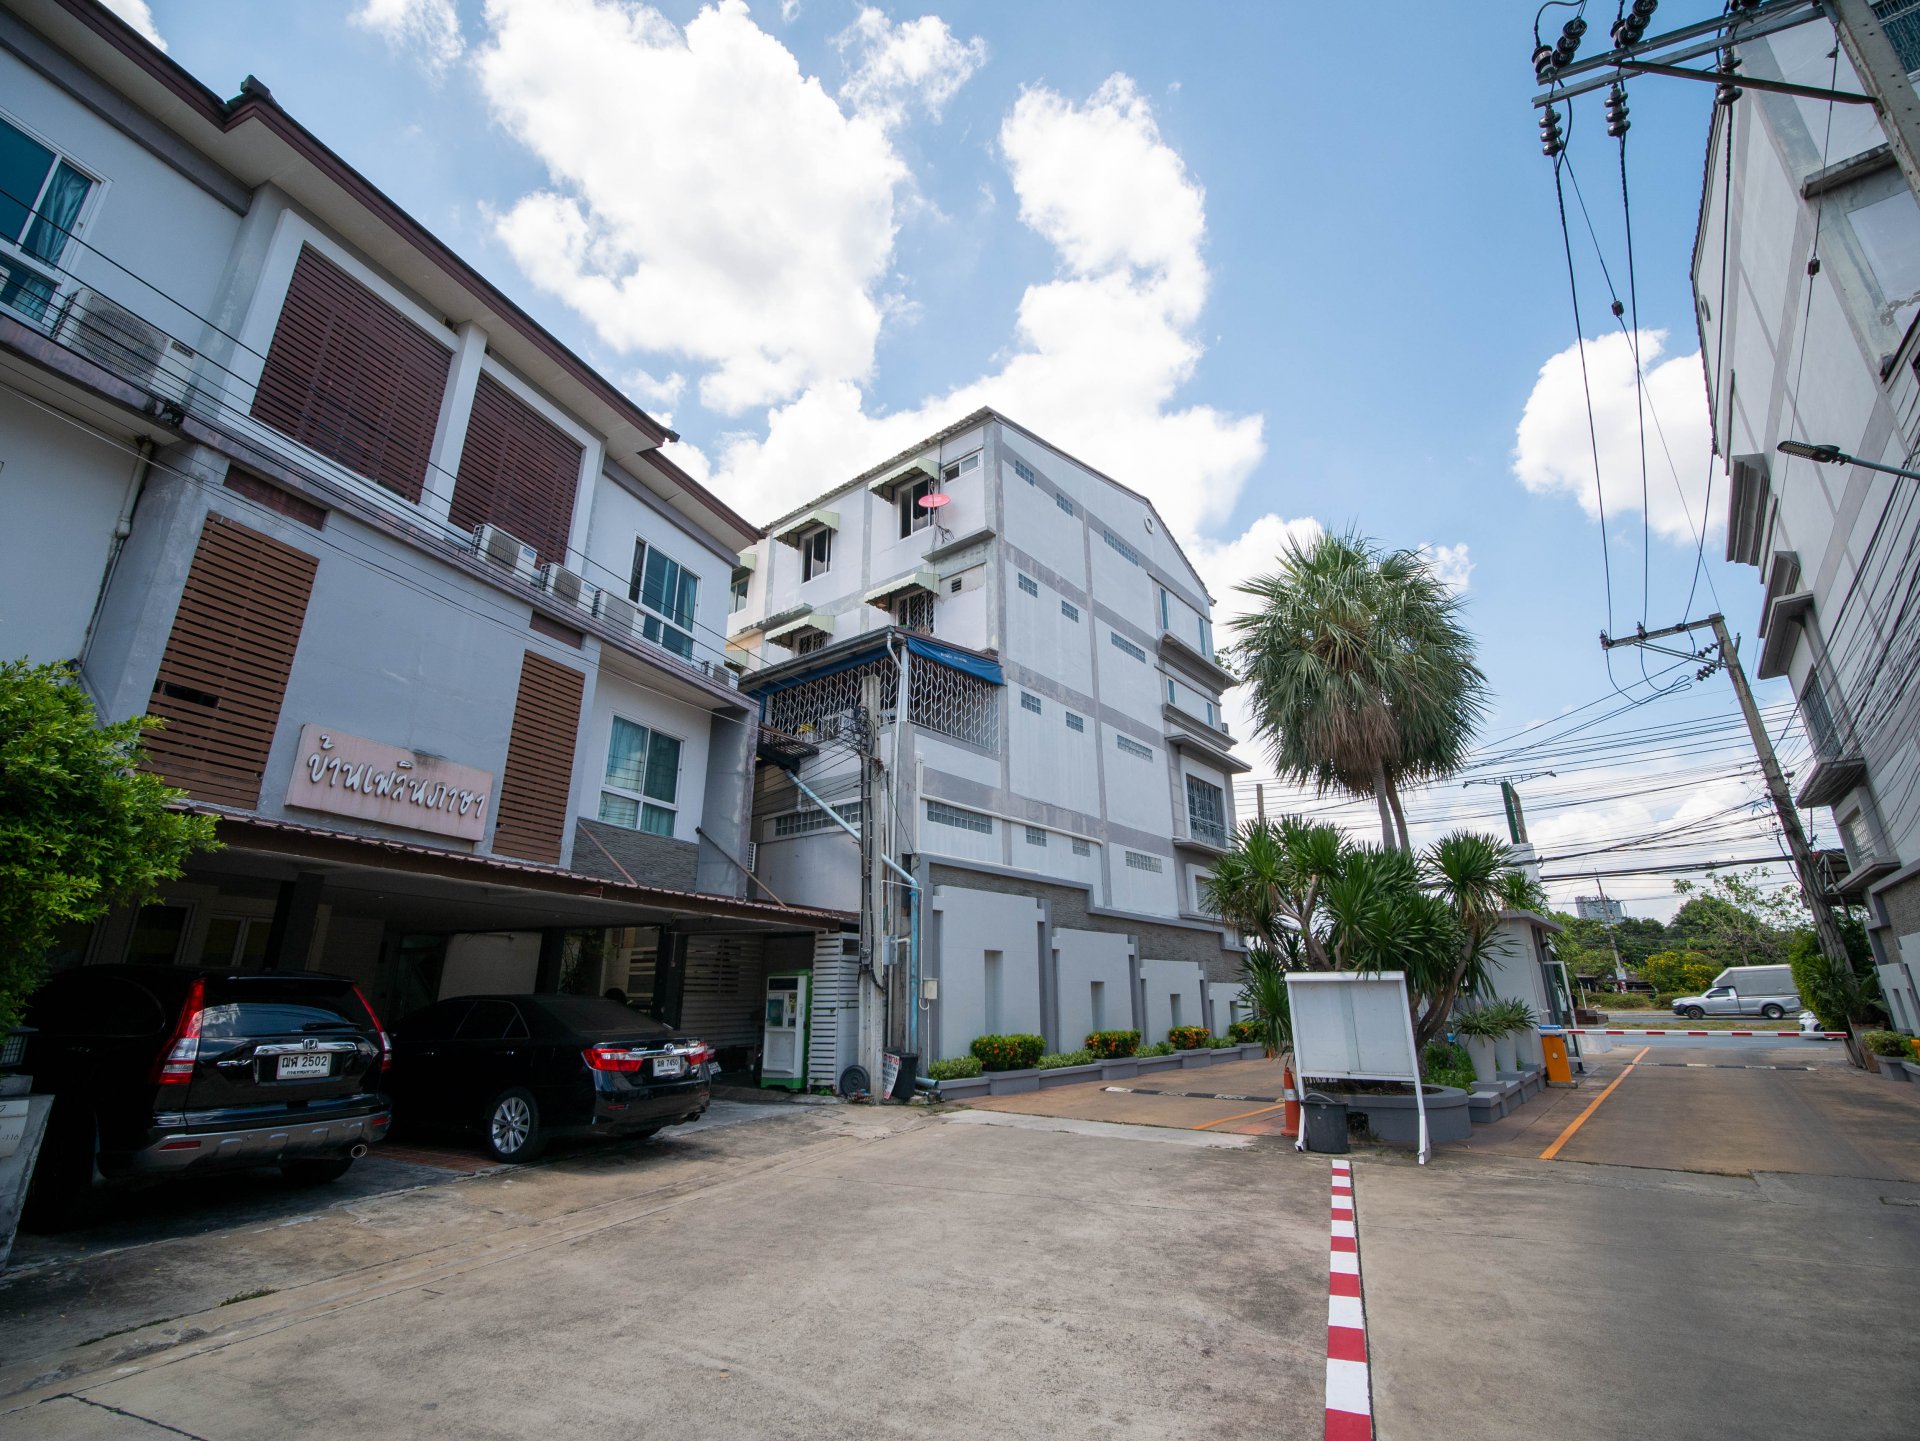 sell !! 3-story townhome, Tharadee project, next to Ratchapruek Road, large land area 132.2 sq m., suitable for an office, home office, and service apartment.